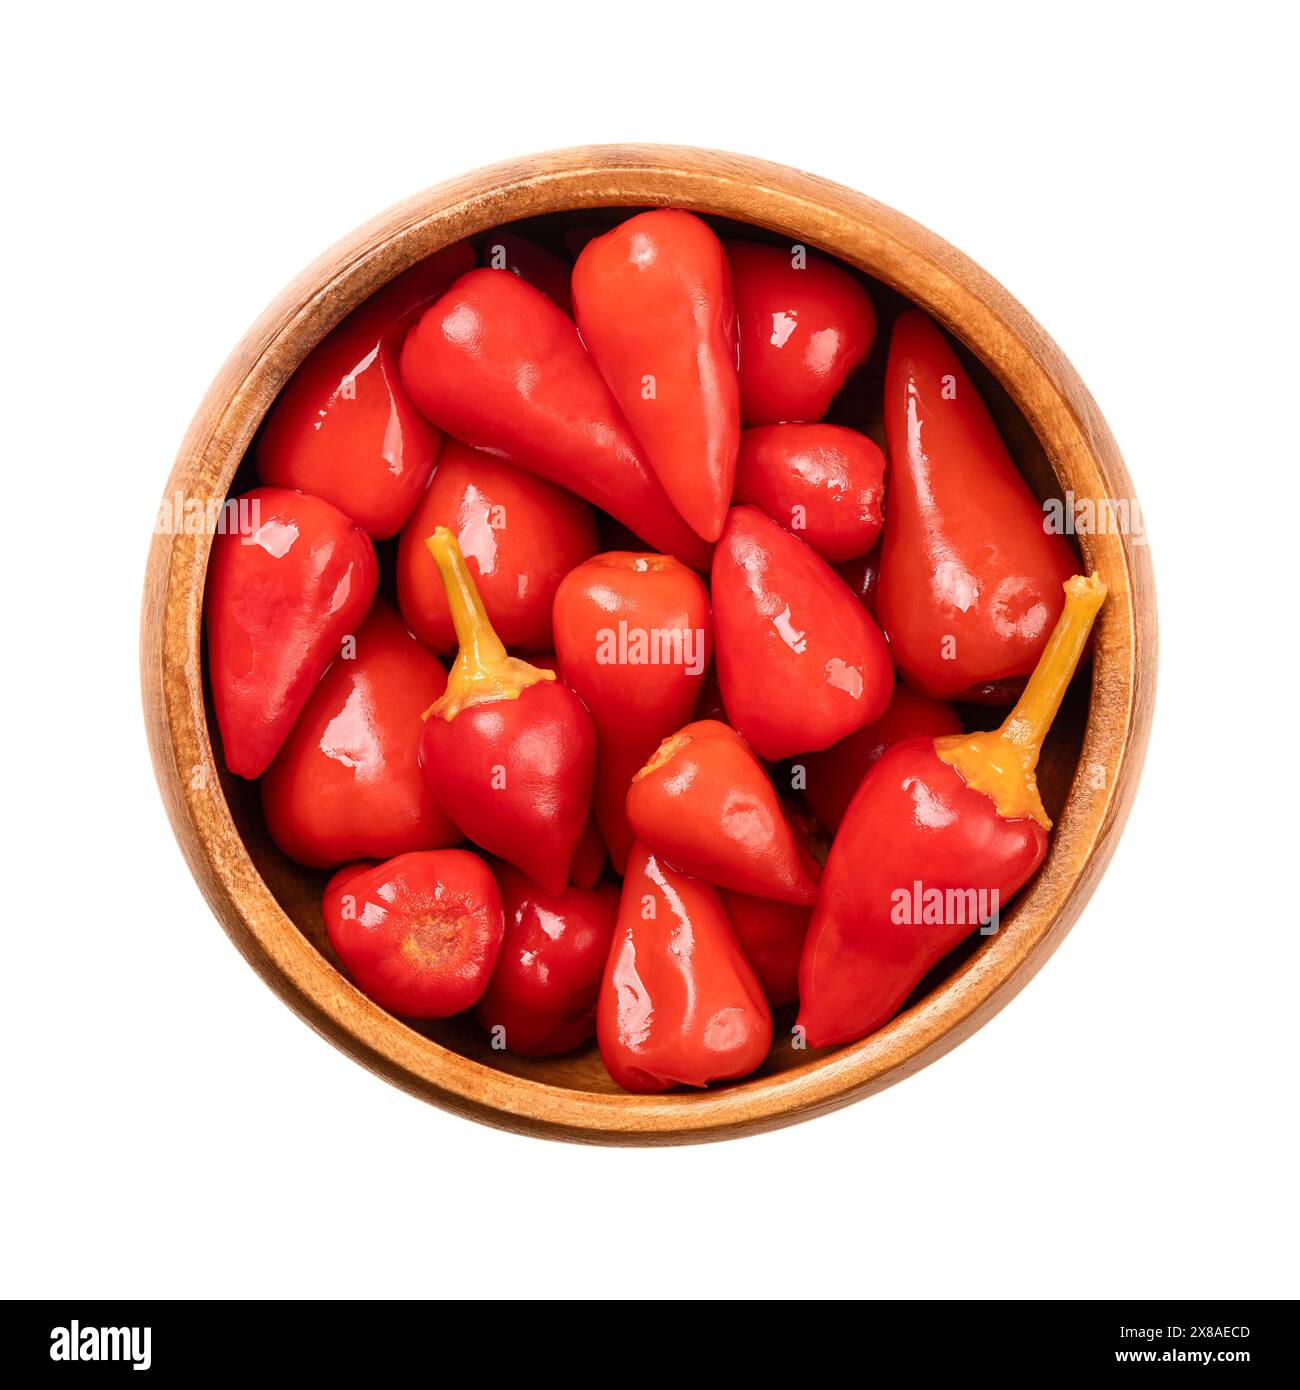 Pickled red hot baby peppers, in a wooden bowl. Small hot chilis, pepperonis, or Capsicum pepper, pasteurized and preserved in a vinegar brine. Stock Photo